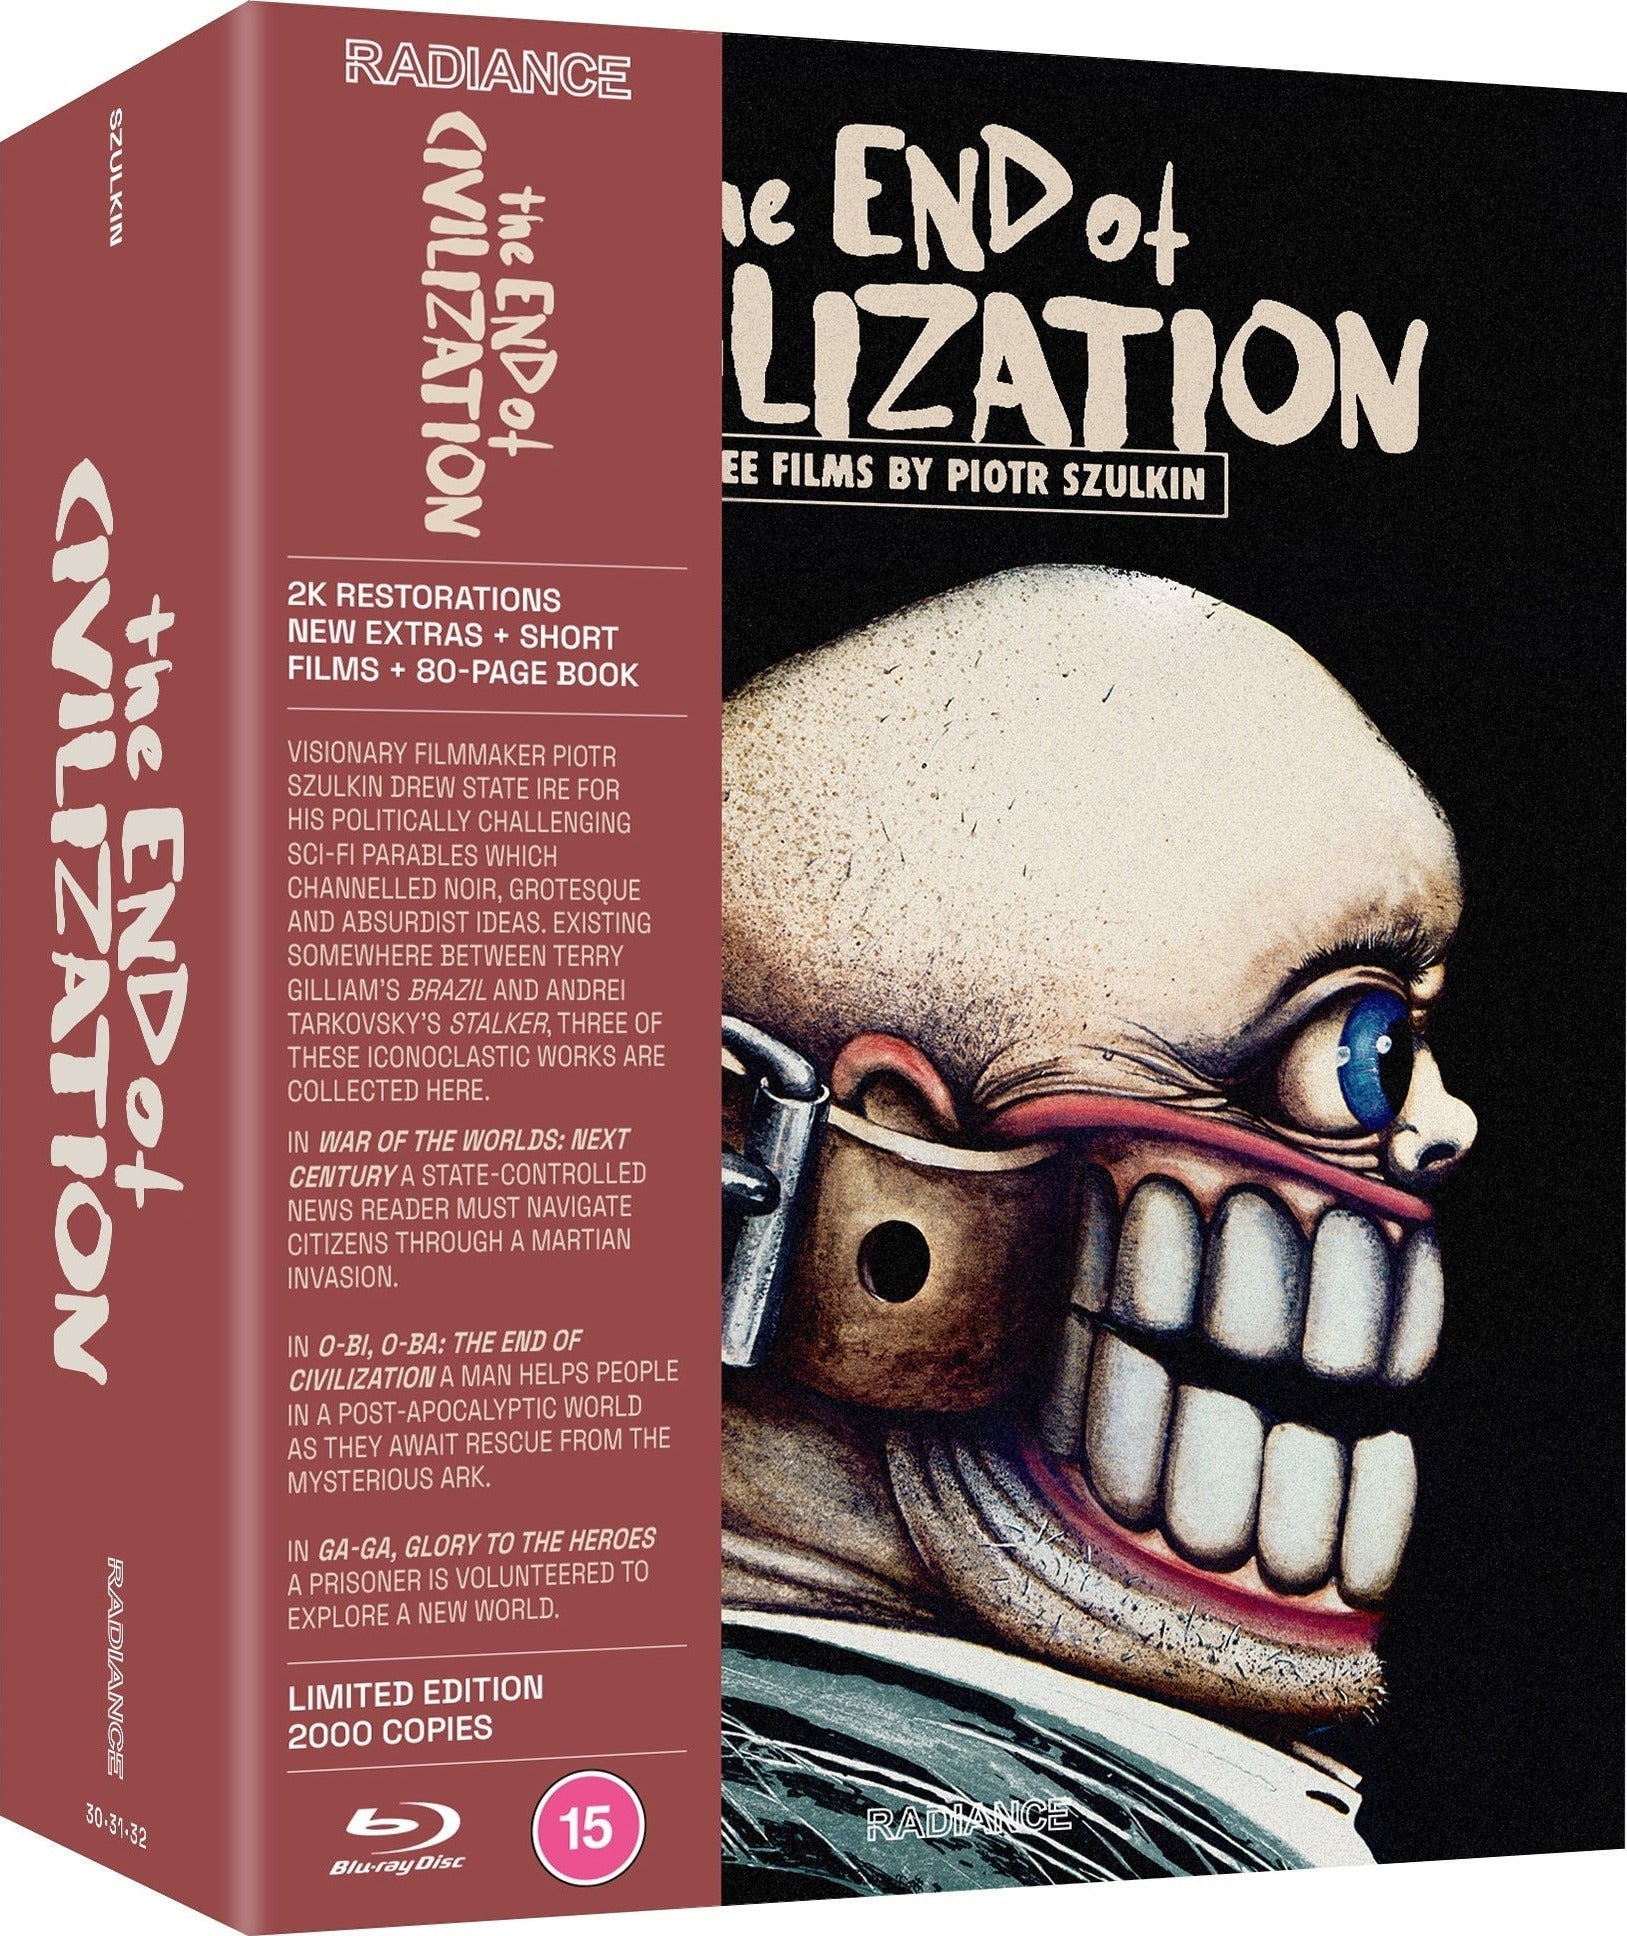 THE END OF CIVILIZATION: THREE FILMS BY PIOTR SZULKIN (REGION FREE IMPORT - LIMITED EDITION) BLU-RAY [SCRATCH AND DENT]